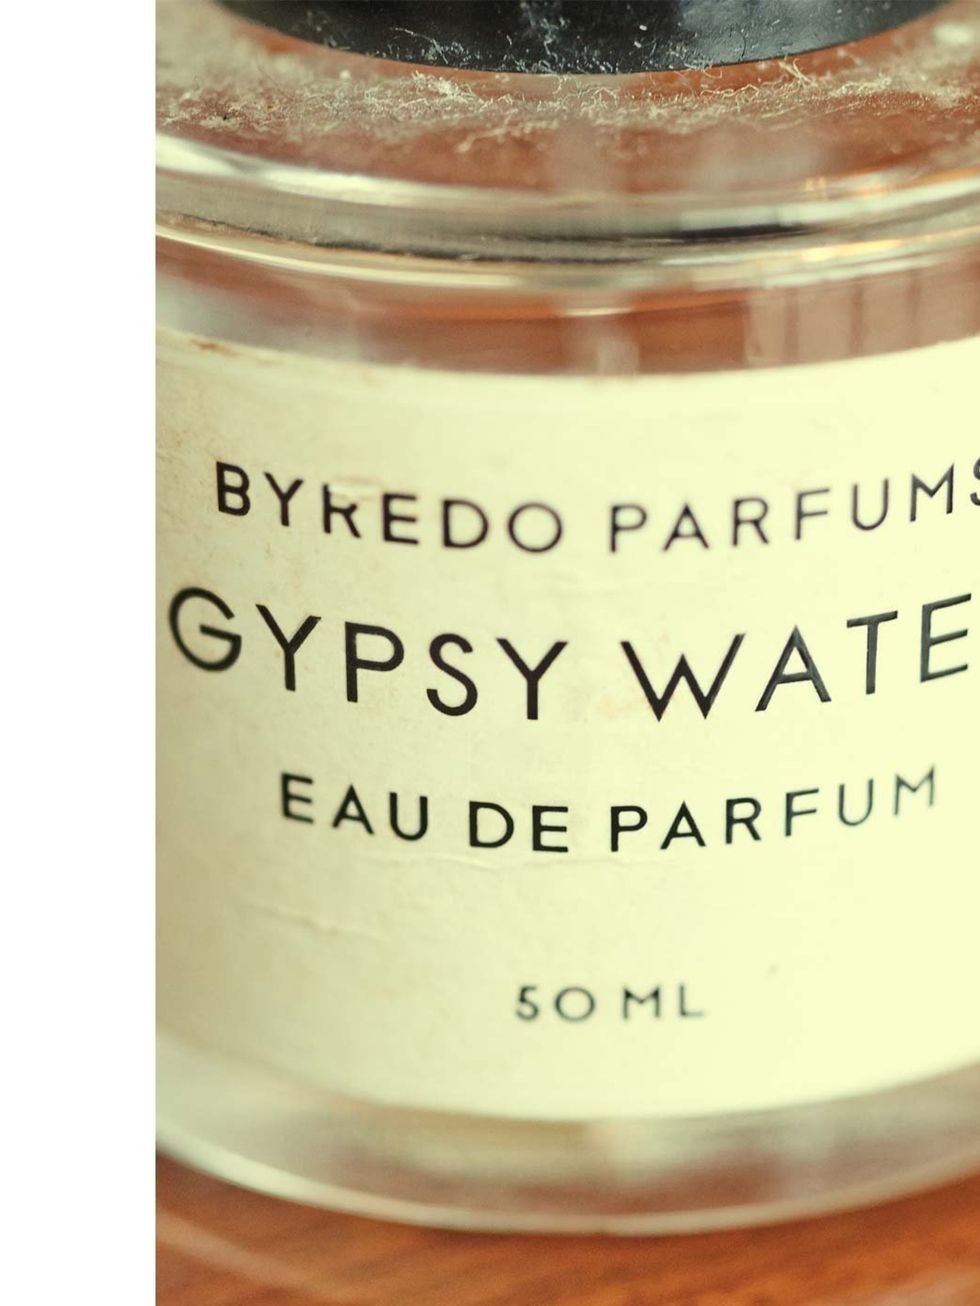 &lt;p&gt;&#039;I think perfume is such a personal thing, I wear &lt;a href=&quot;http://www.elleuk.com/beauty/beauty-notes-daily/pop-up-and-pop-in&quot;&gt;Byredo&lt;/a&gt; Gypsy Water, I think it&#039;s beautiful.&#039;&lt;/p&gt;